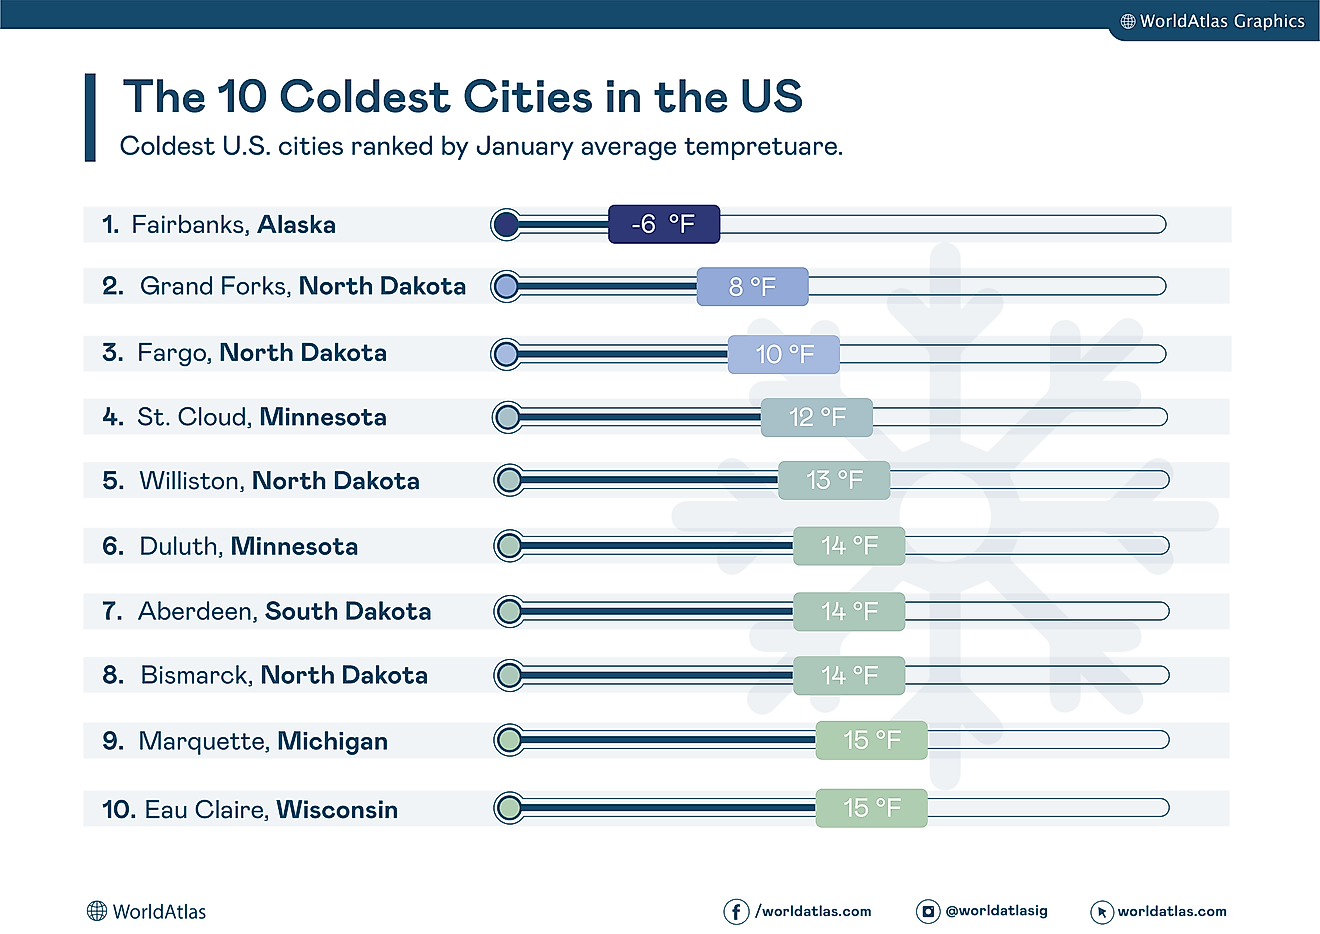 Coldest cities in the US